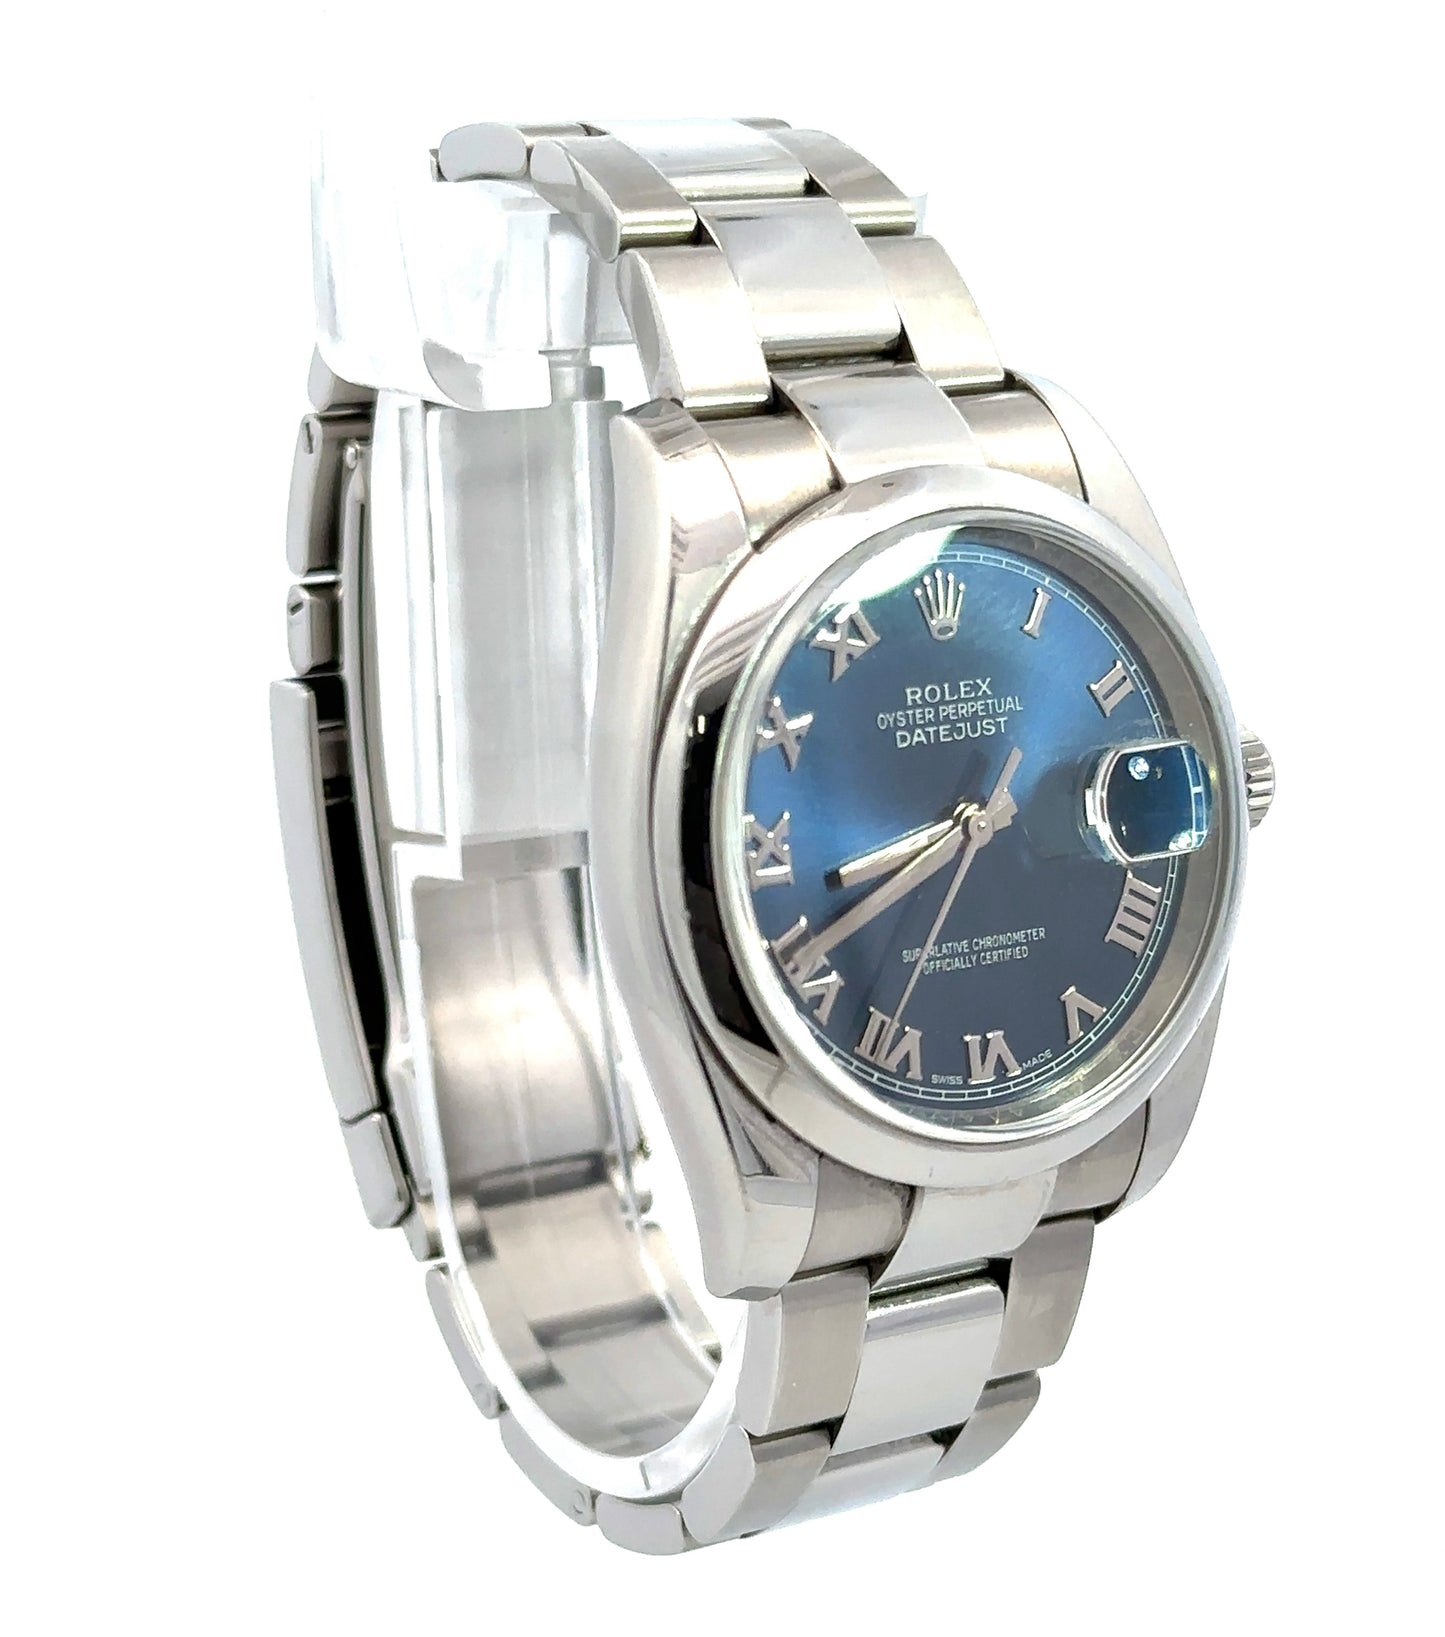 Diagonal view of rolex with blue roman numeral face and stainless steel case and band.